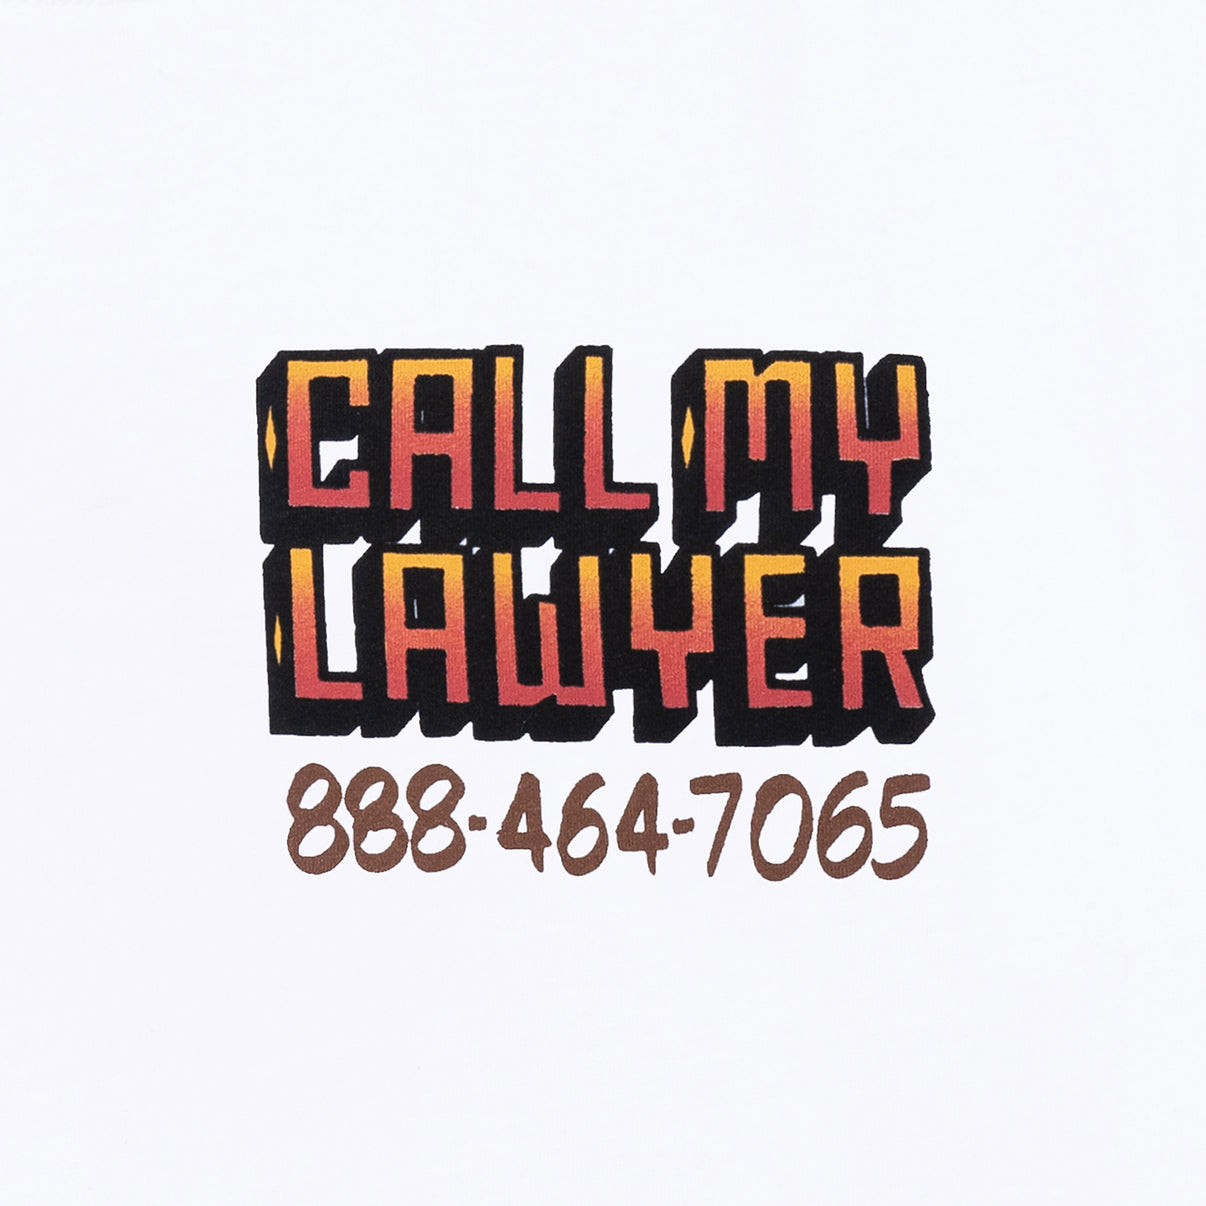 Market - Call My Lawyer Sign Tee - White